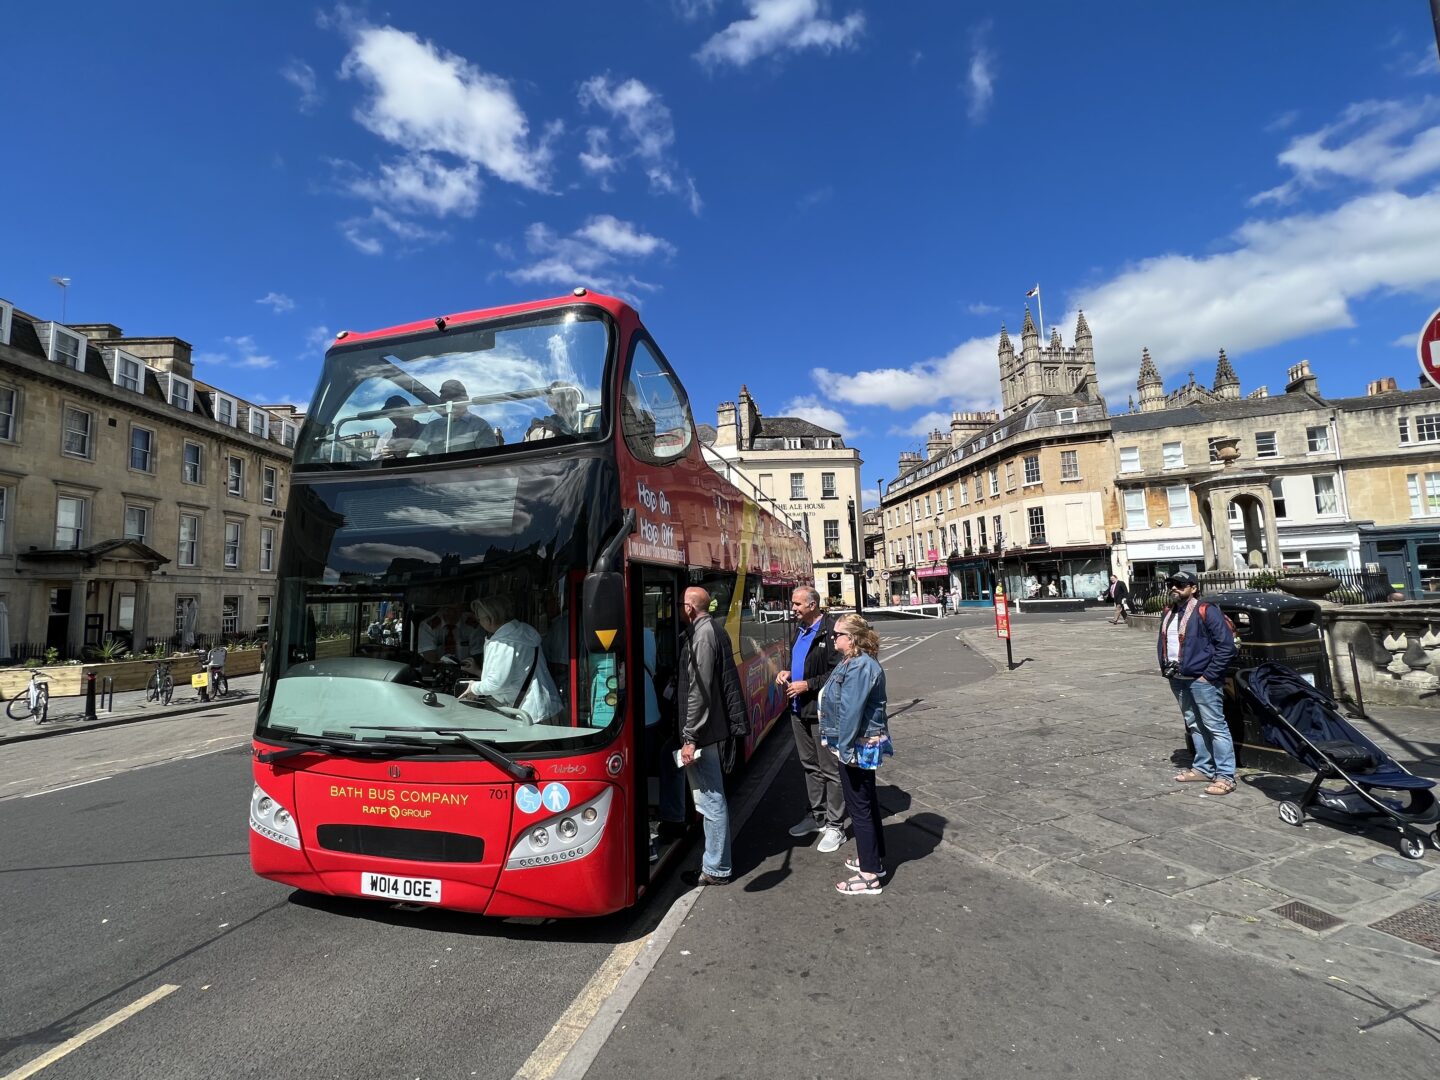 Things To Do in Bath UK - Toot hop on hop off tour bath